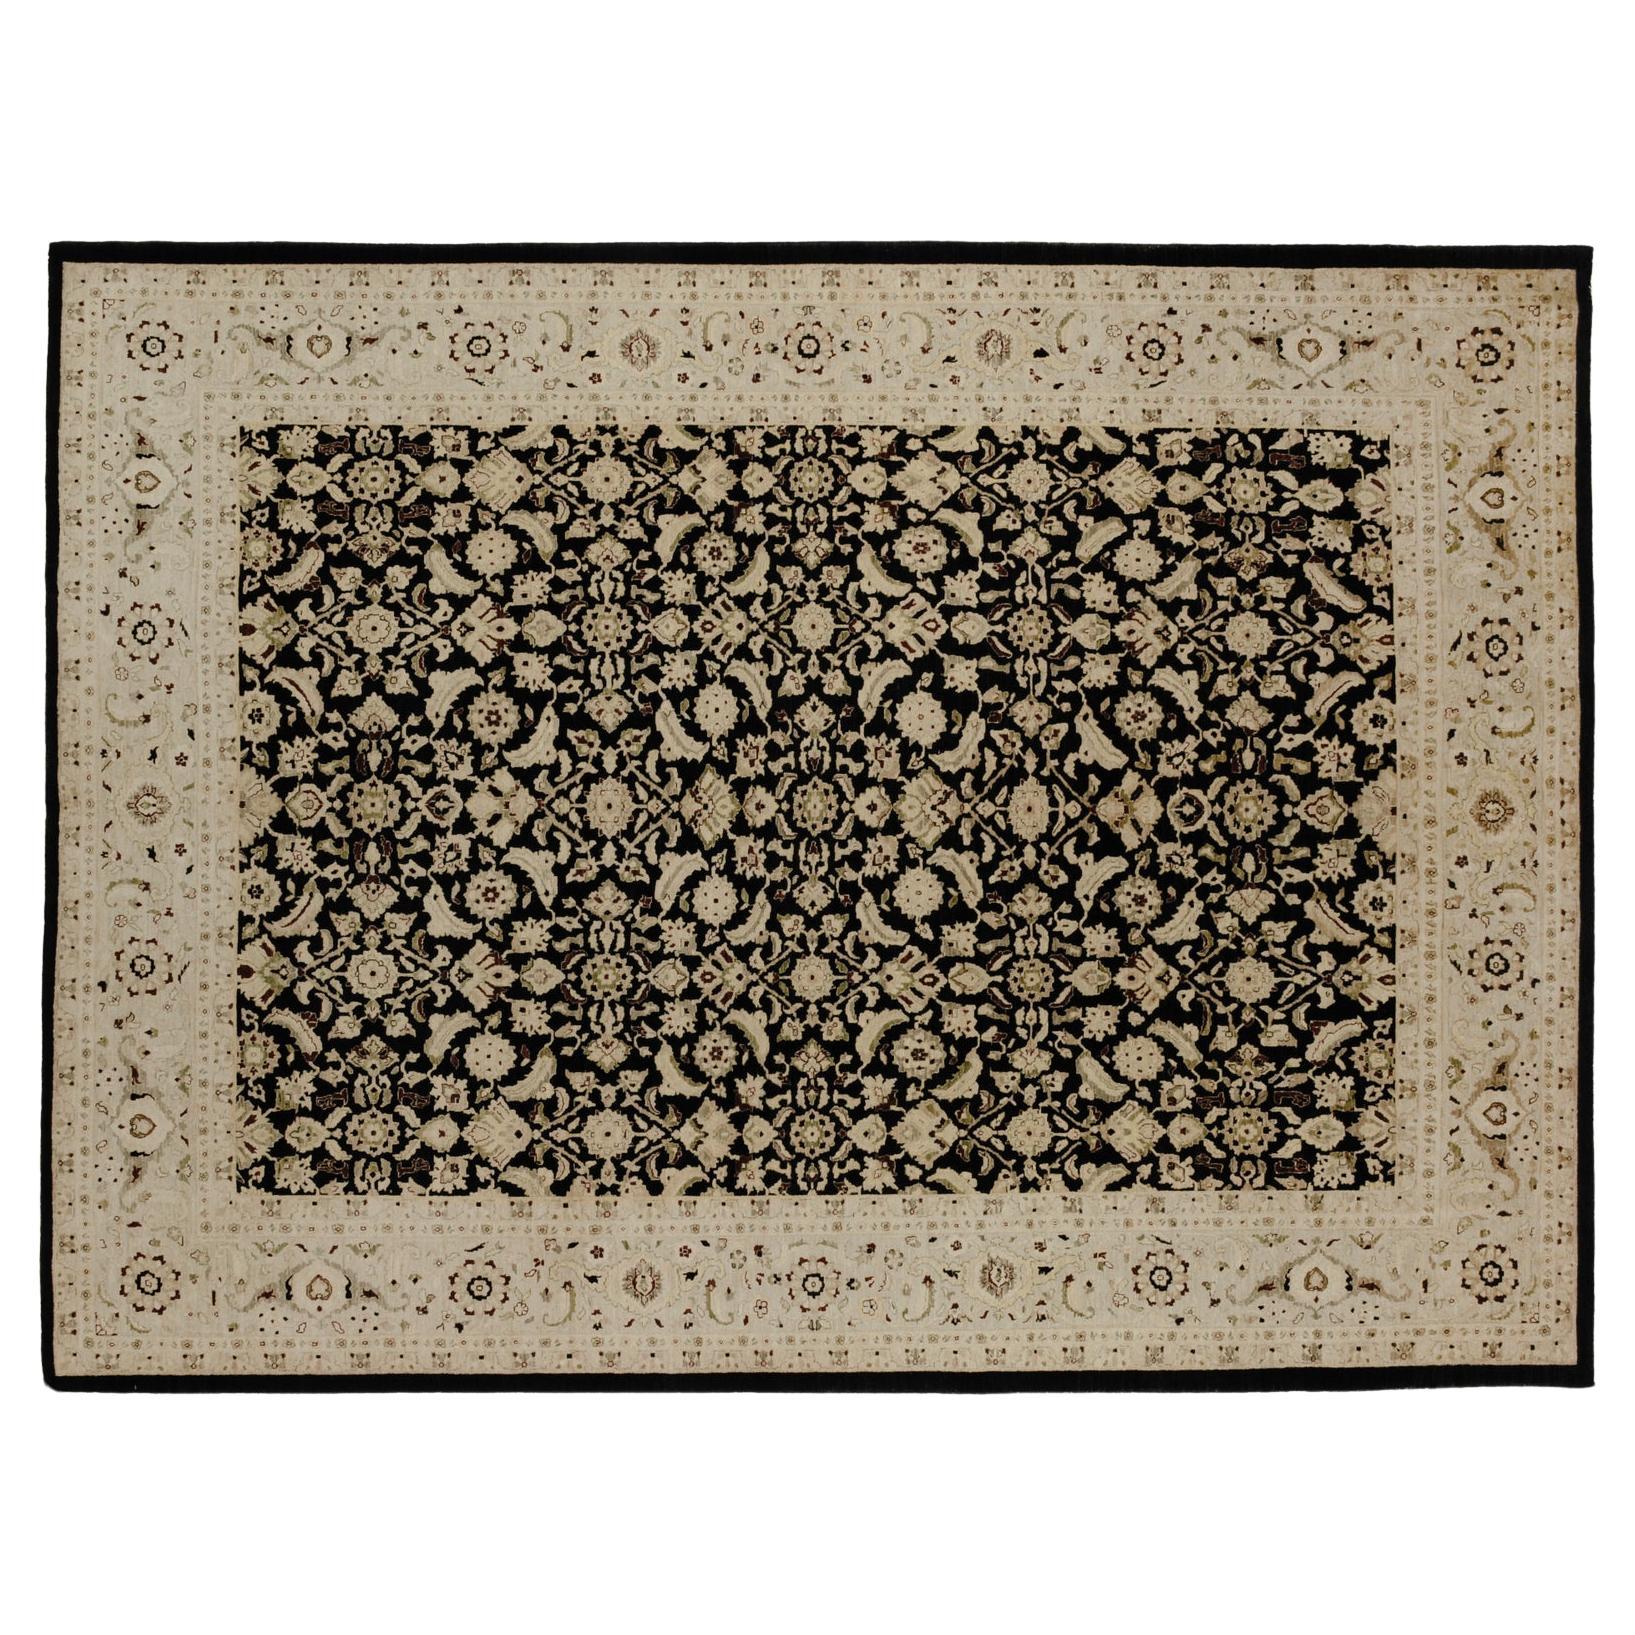 Black and Gold Intricate Floral Design Rug in 9'x12'